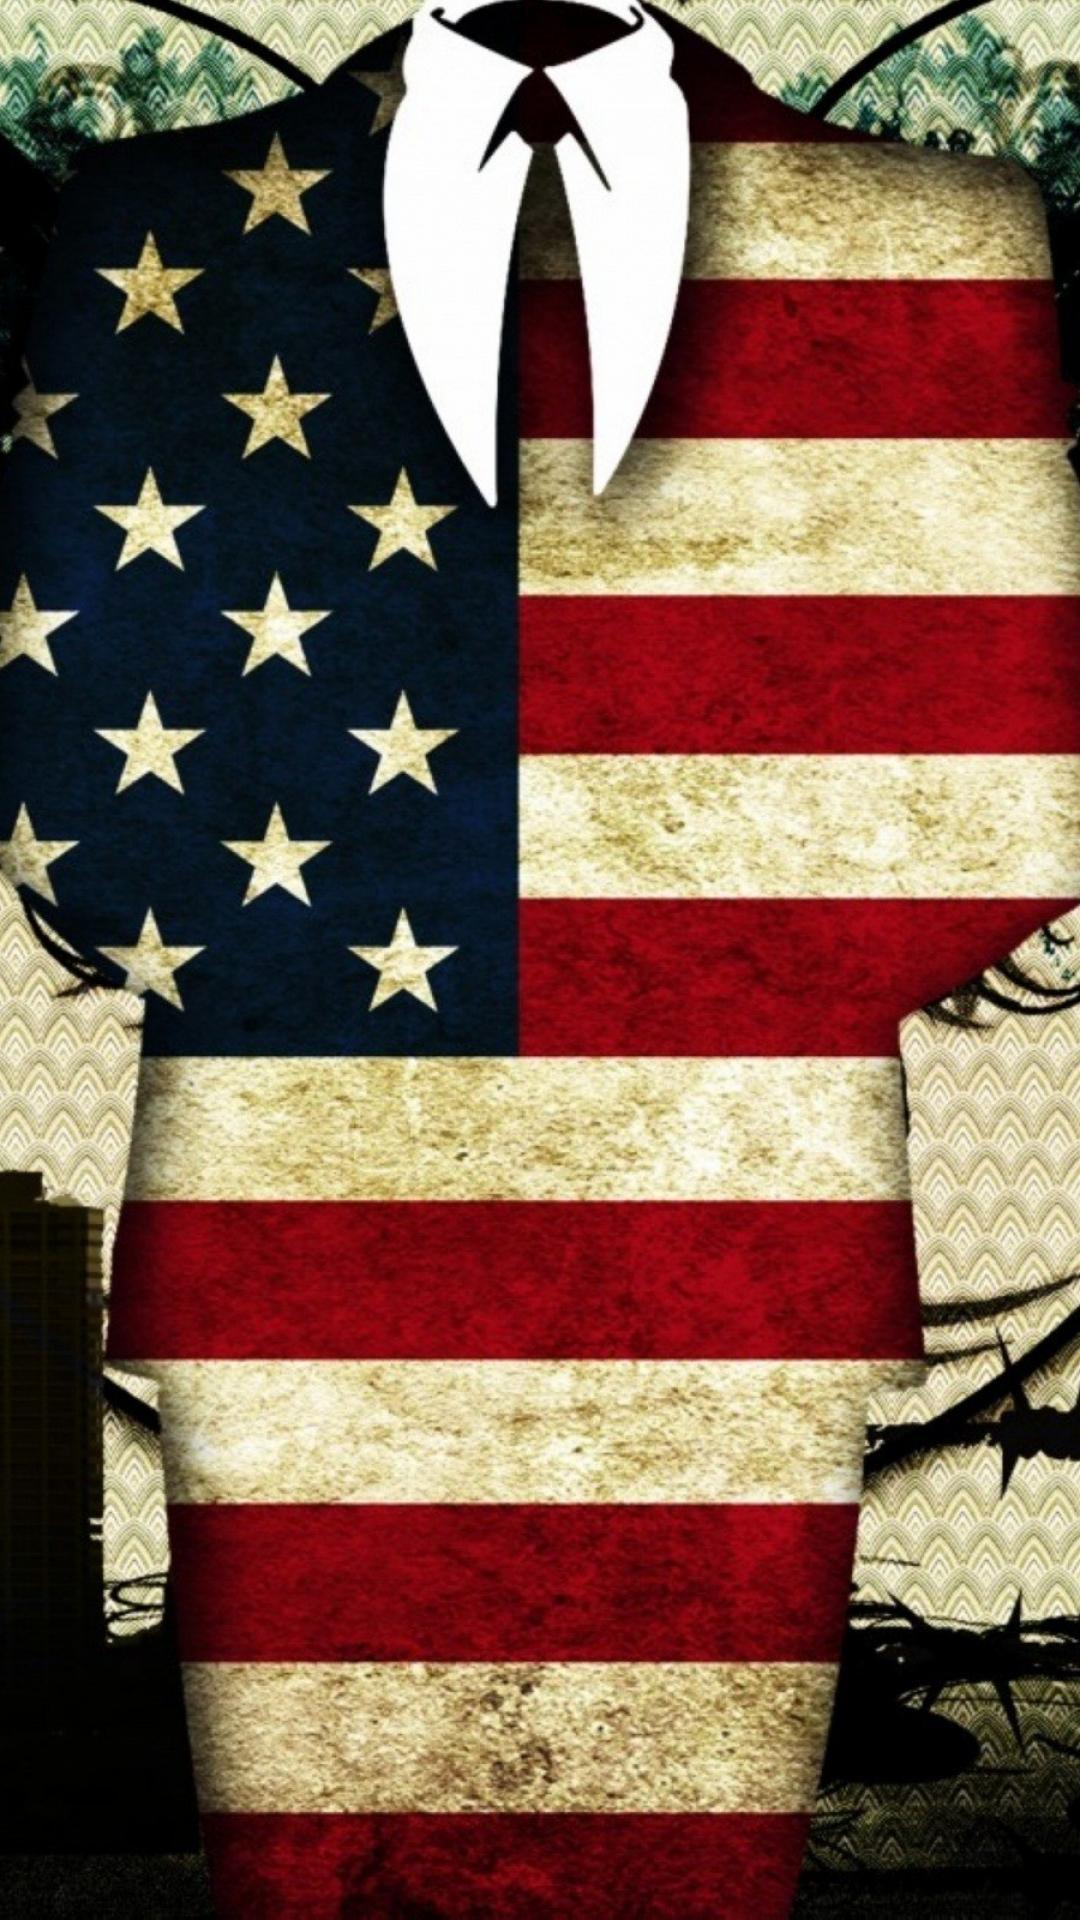 American Flag IPhone 5 Wallpaper 66 images